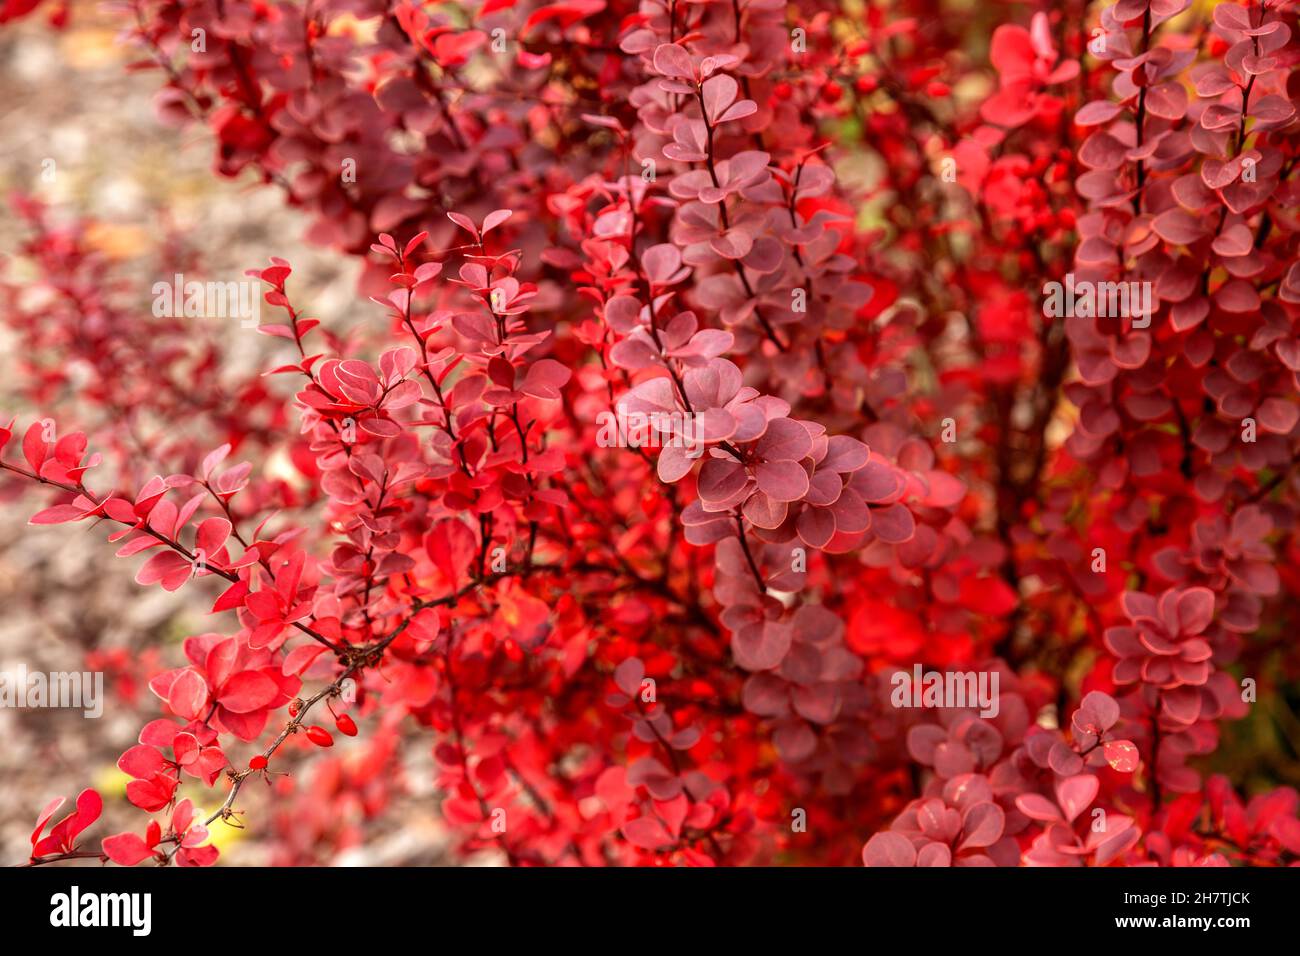 Autumn barberry bush Berberis thunbergii (or Japanese barberry) with bright red leaves and berries. Autumn natural background Stock Photo